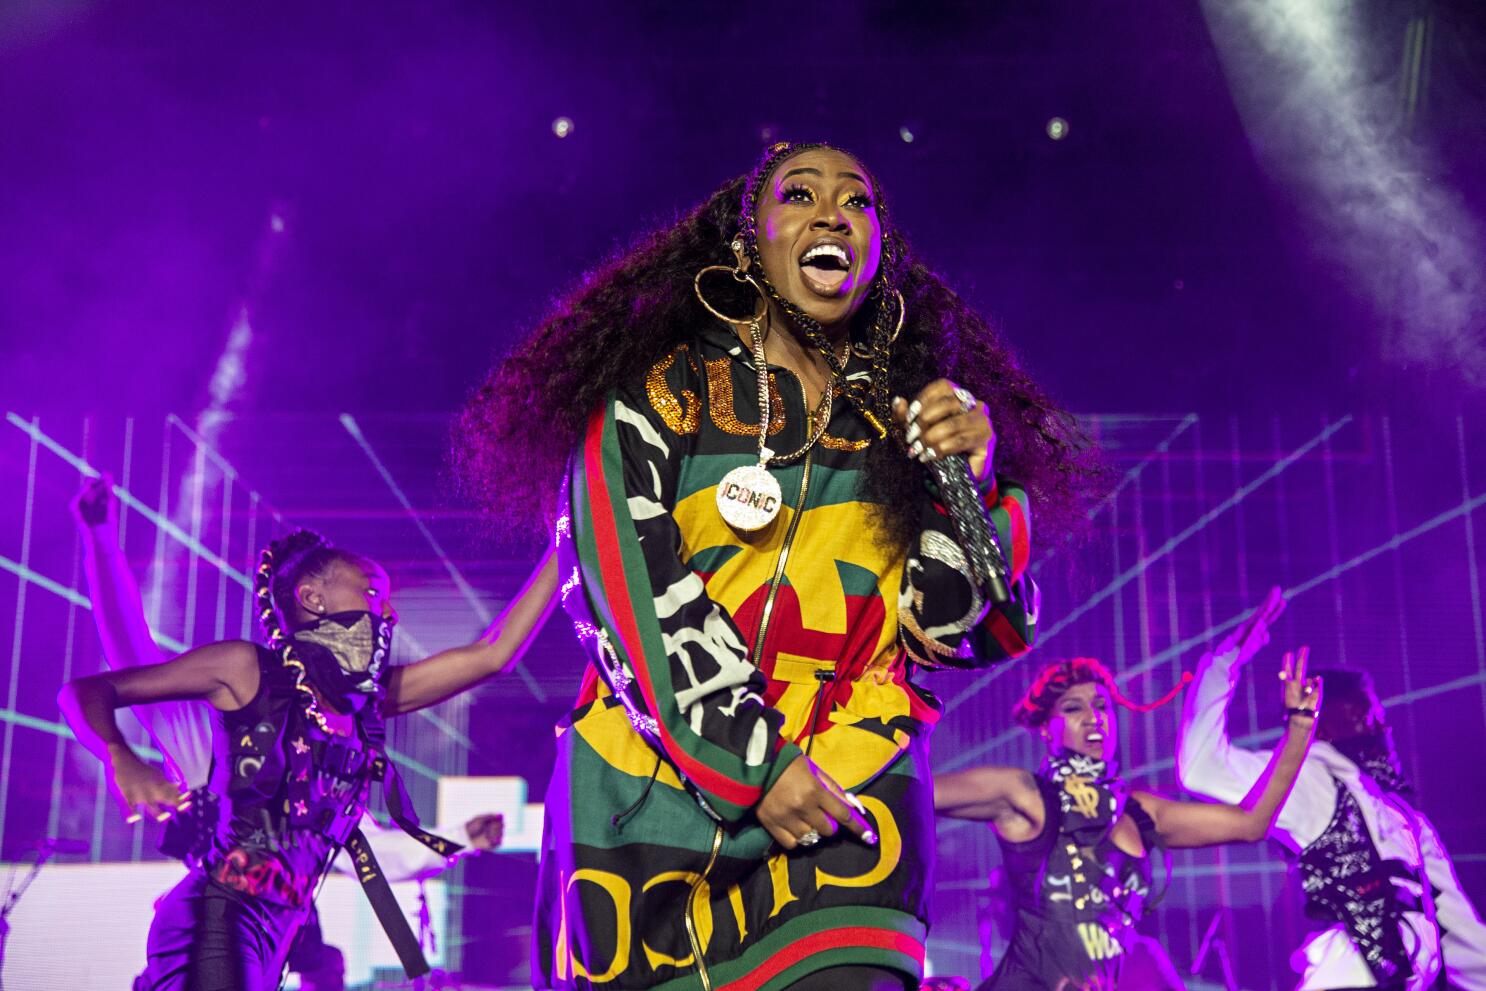 Video Missy Elliott inducted into Rock and Roll hall of Fame - ABC News